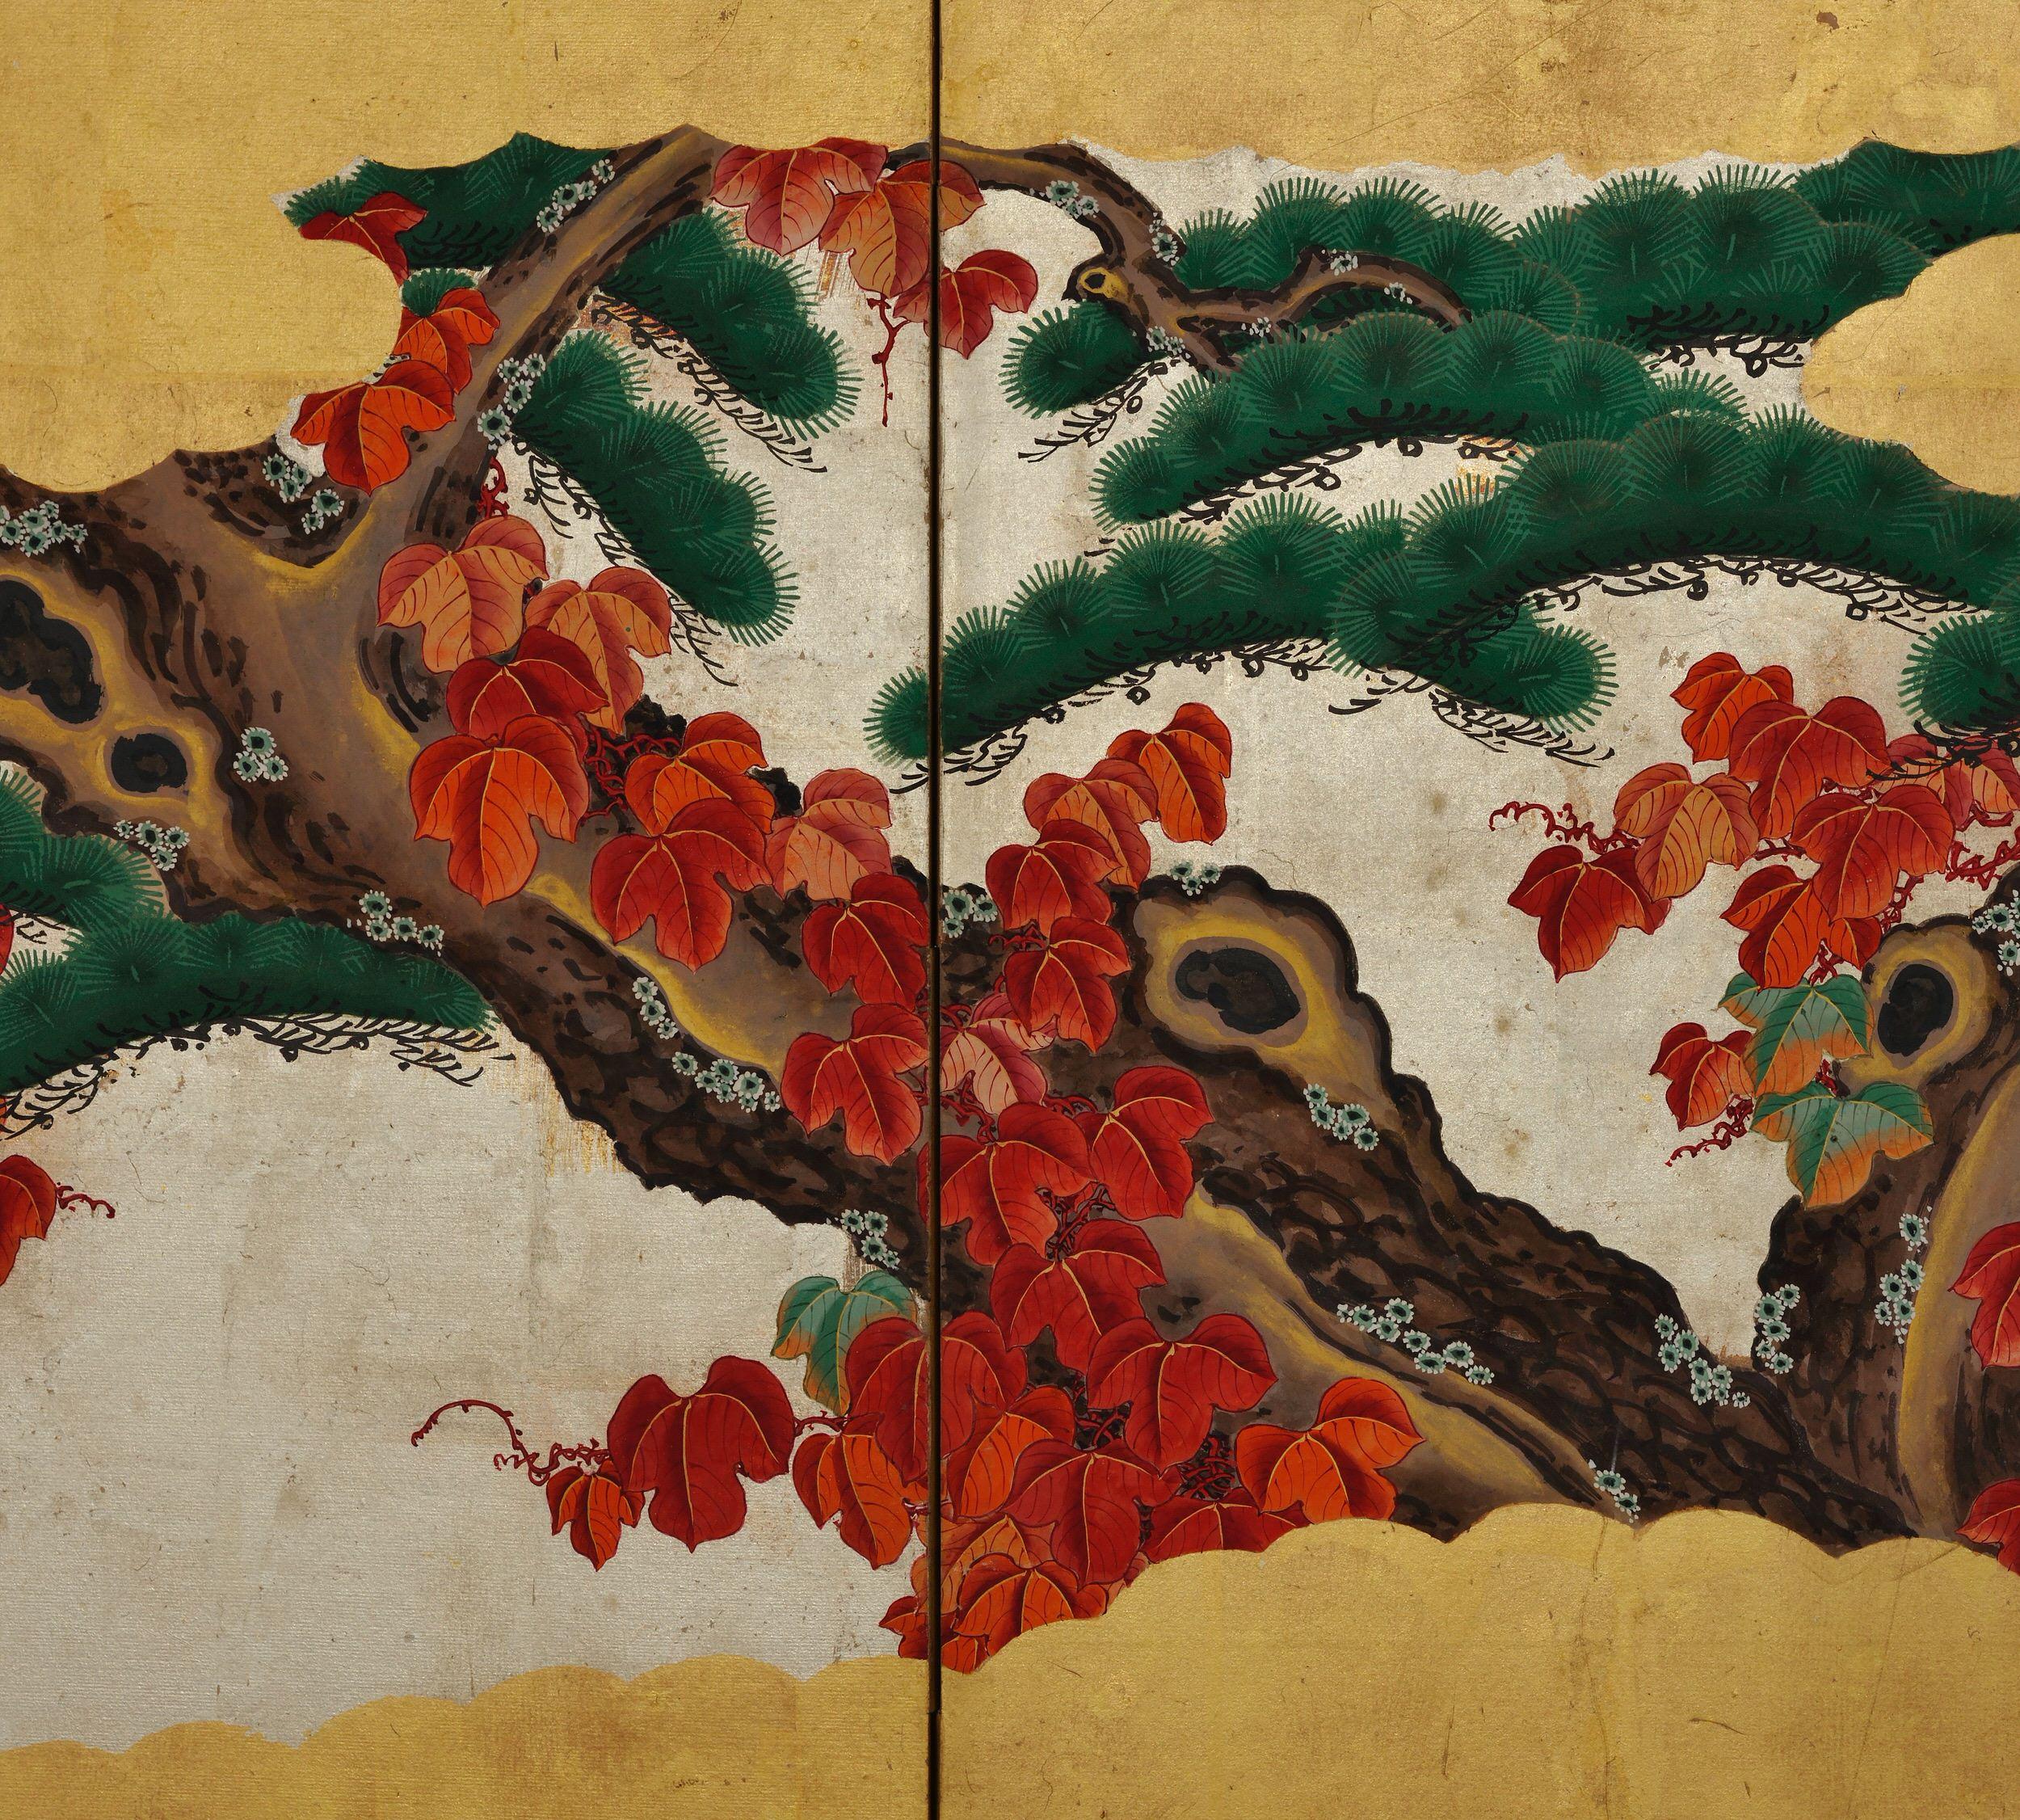 Edo 19th Century Small Japanese Screen Pair, Pine Trees and Vines on Gold Leaf